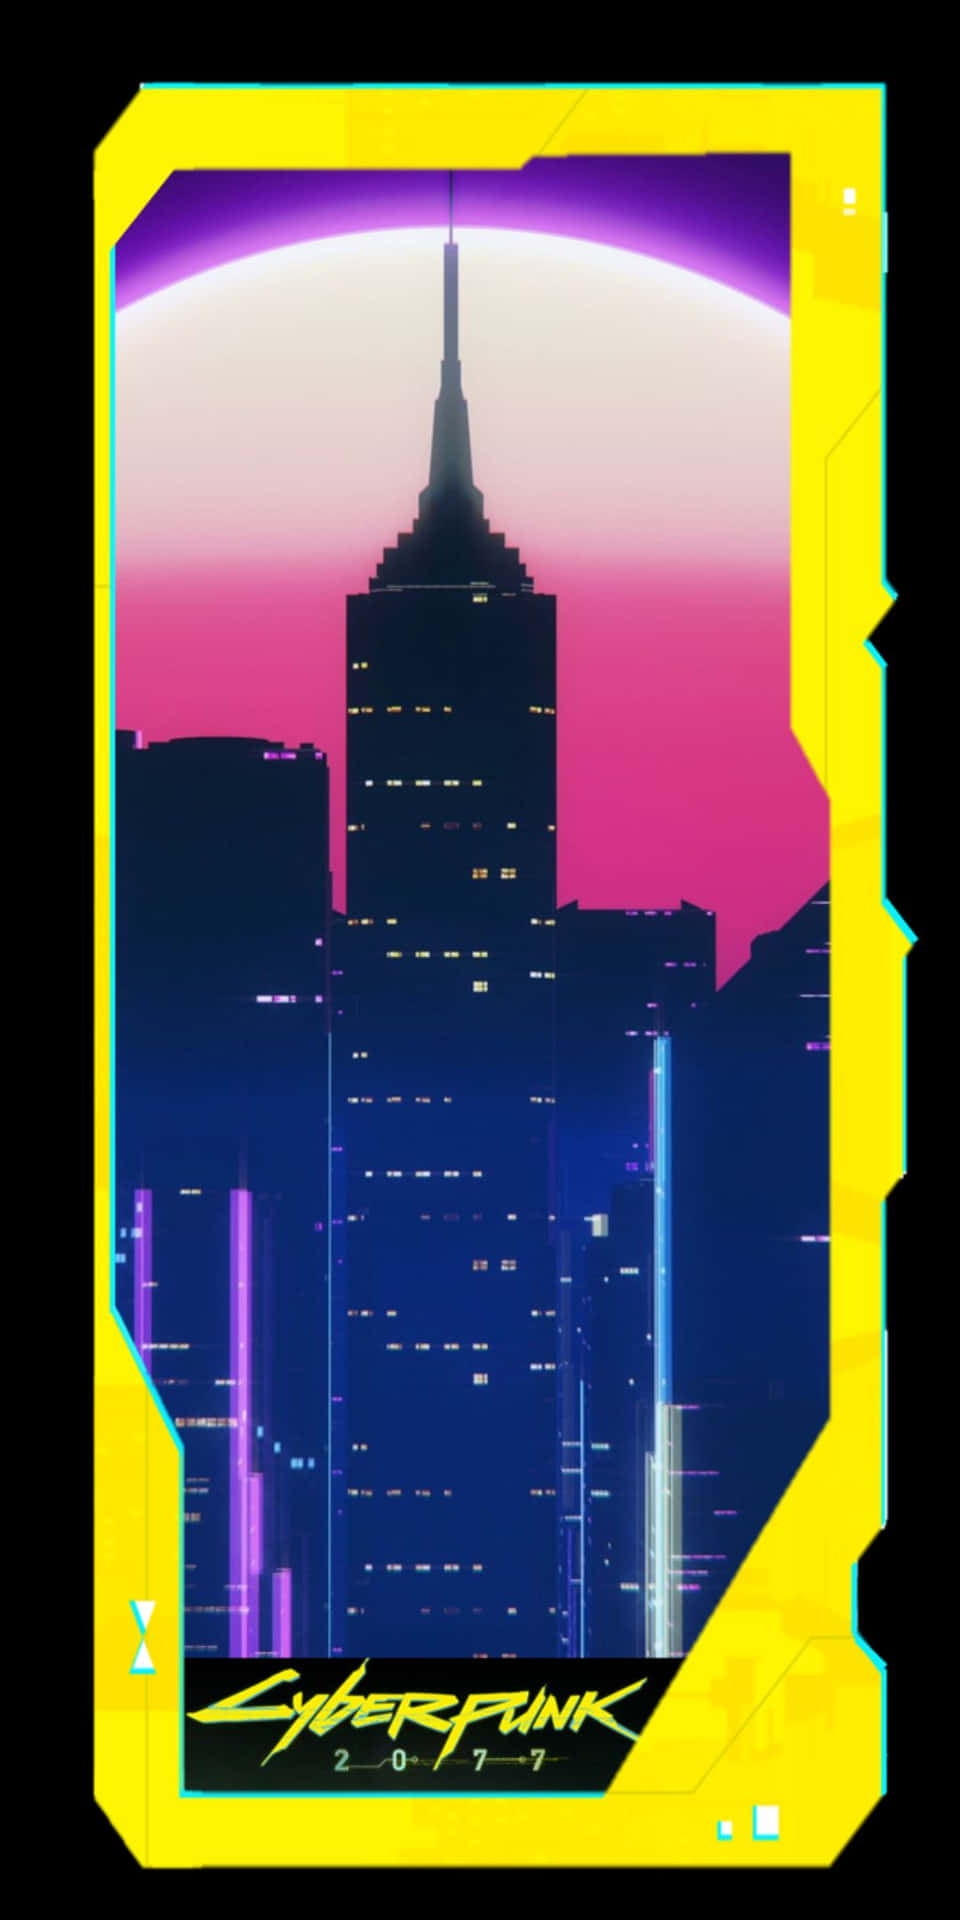 “Unlock the possibilities in an incredible world with Pixel 3 and Cyberpunk 2077”